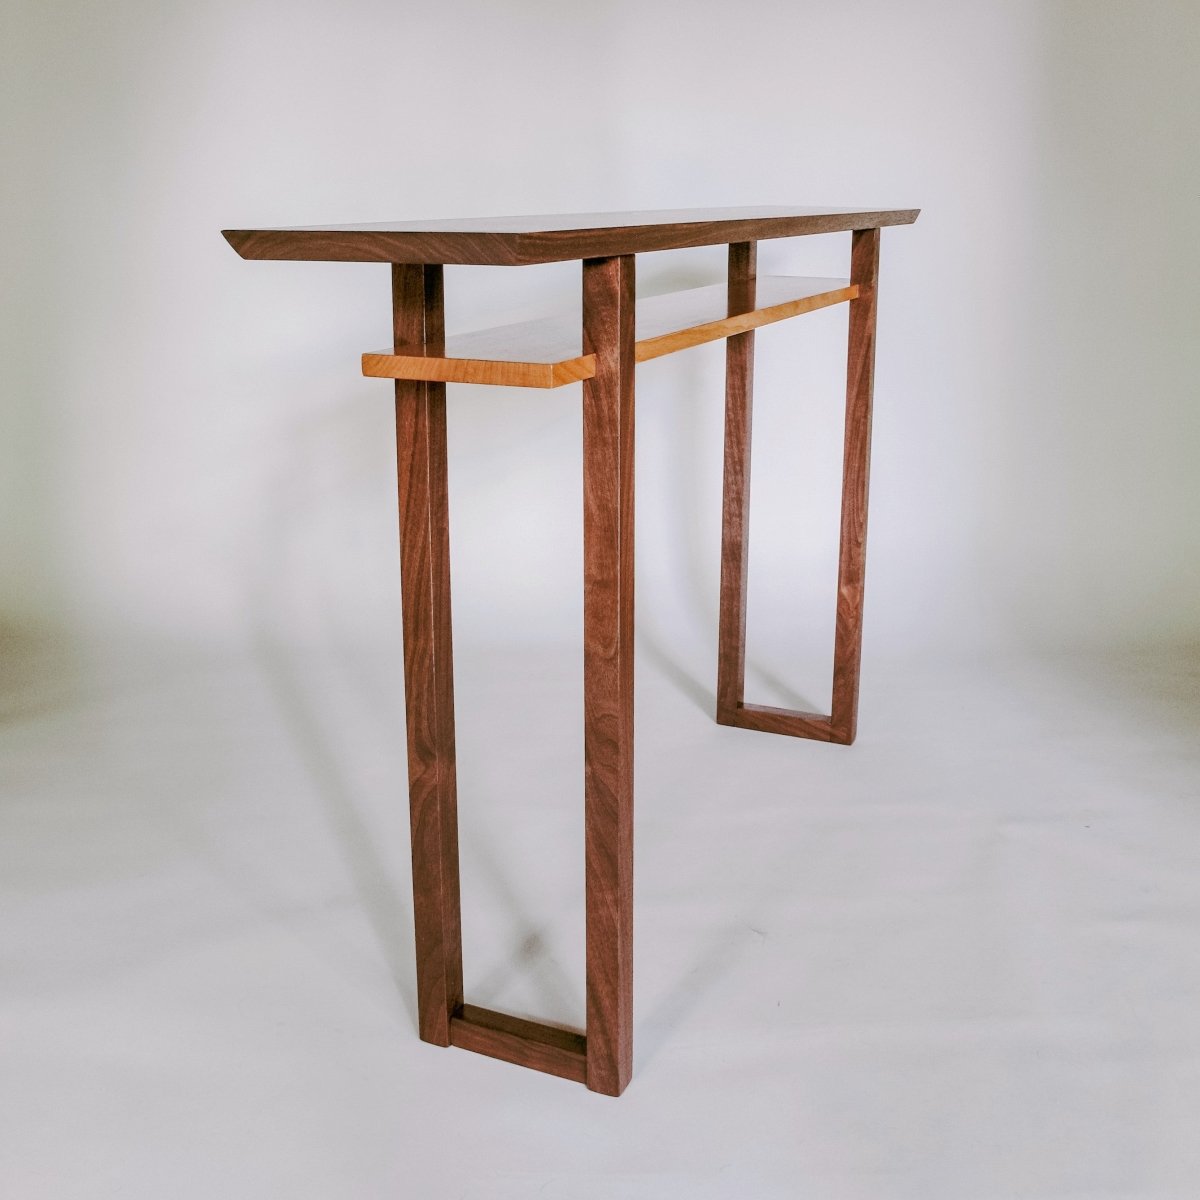 Narrow console table in walnut and cherry